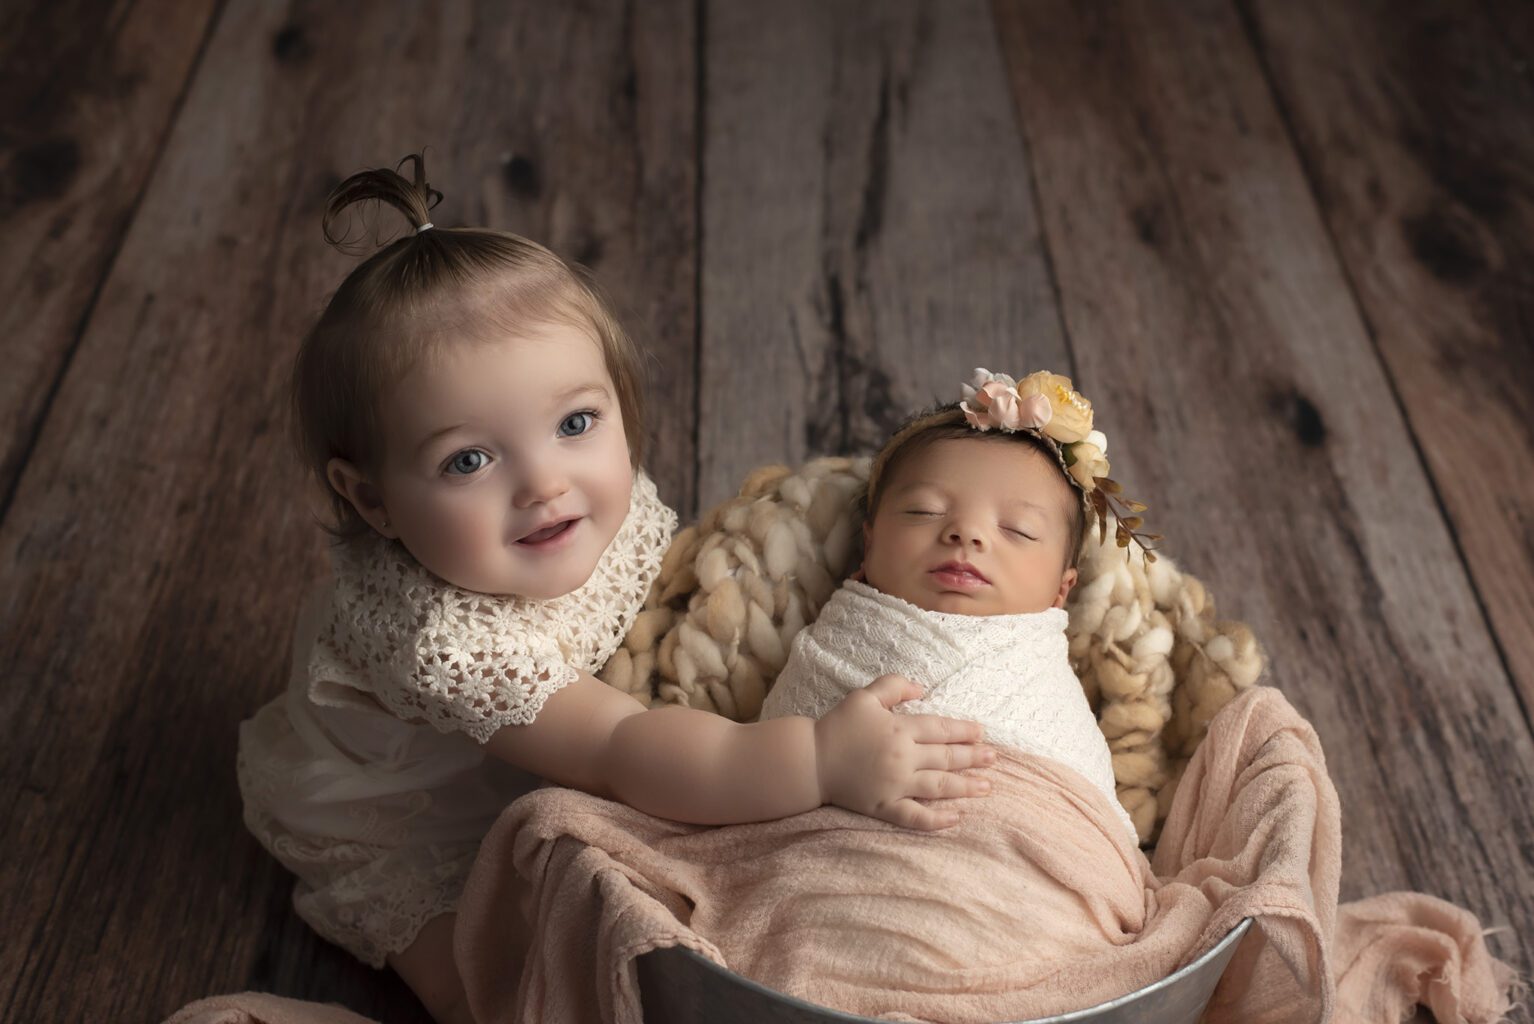 Two year old sister with newborn sister